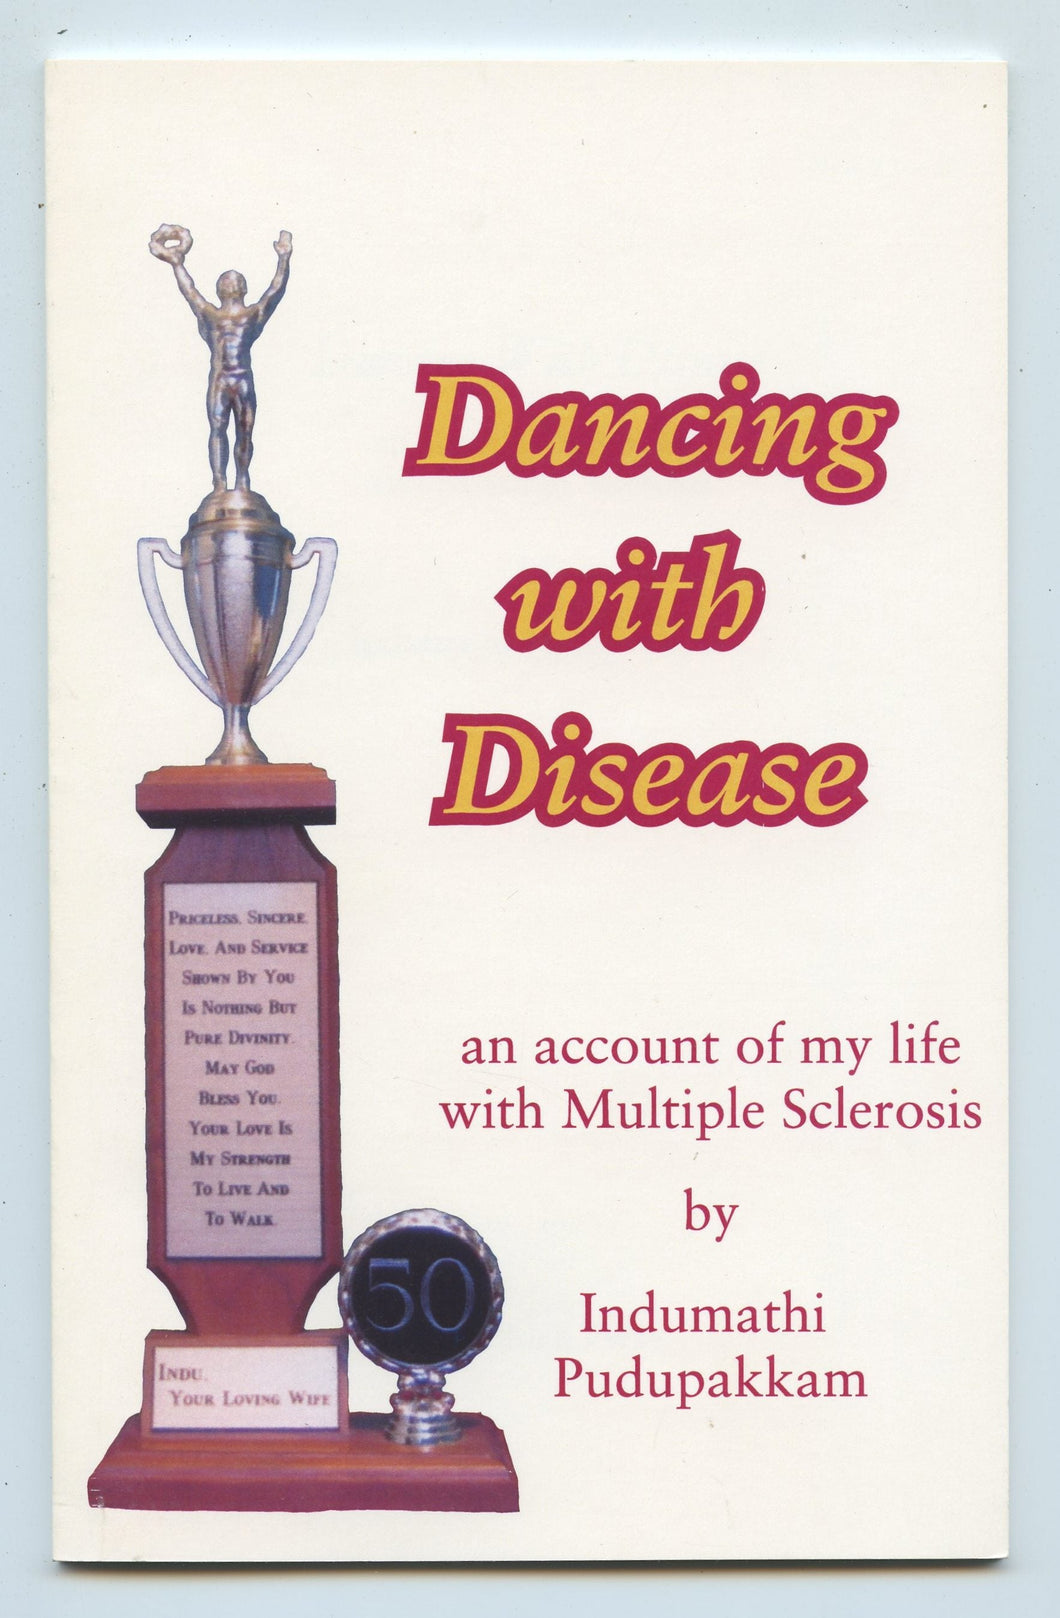 Dancing with Disease: an account of my life with Multiple Sclerosis